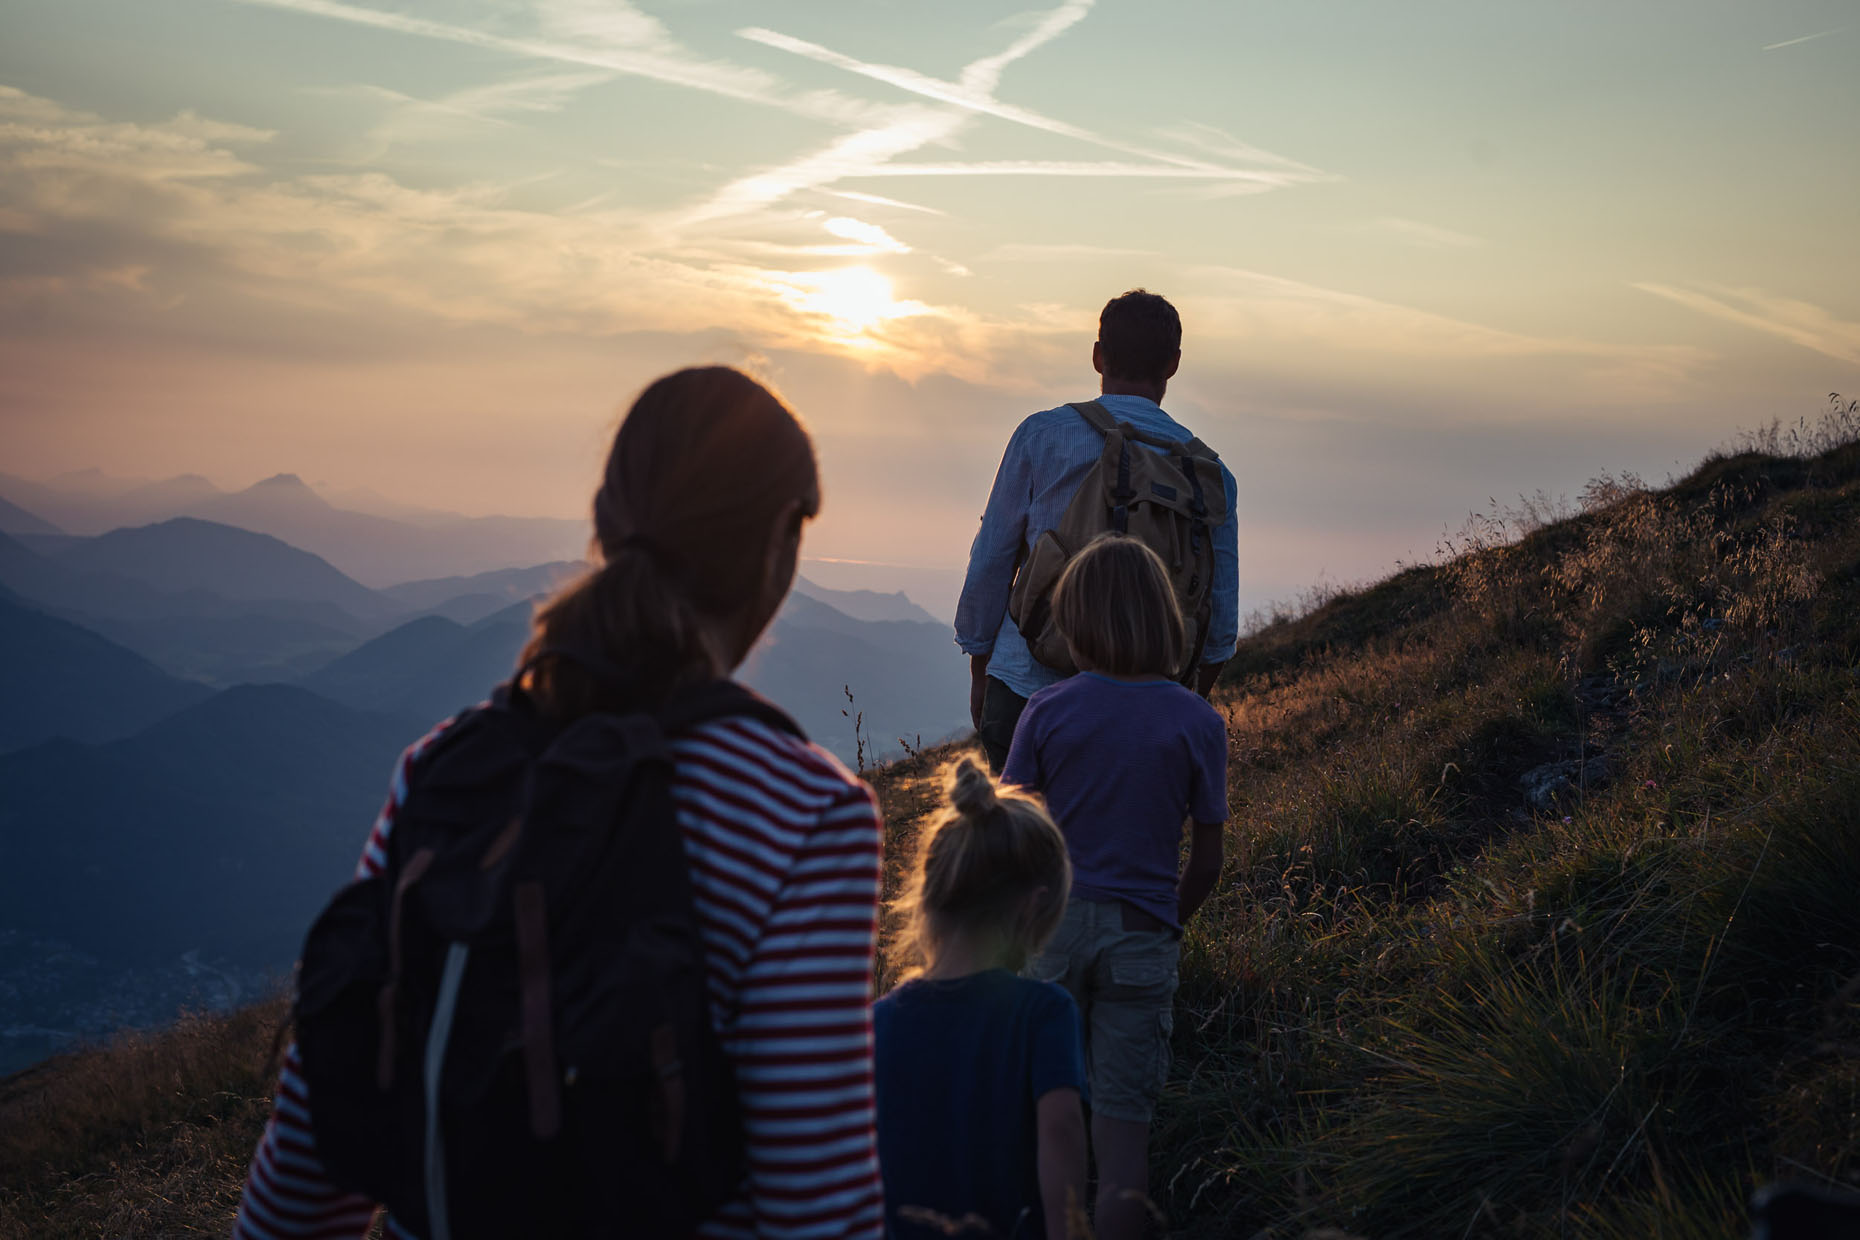 A family with two small boys hiking on a grassy mountain ridge in the beautiful golden light just before sunset